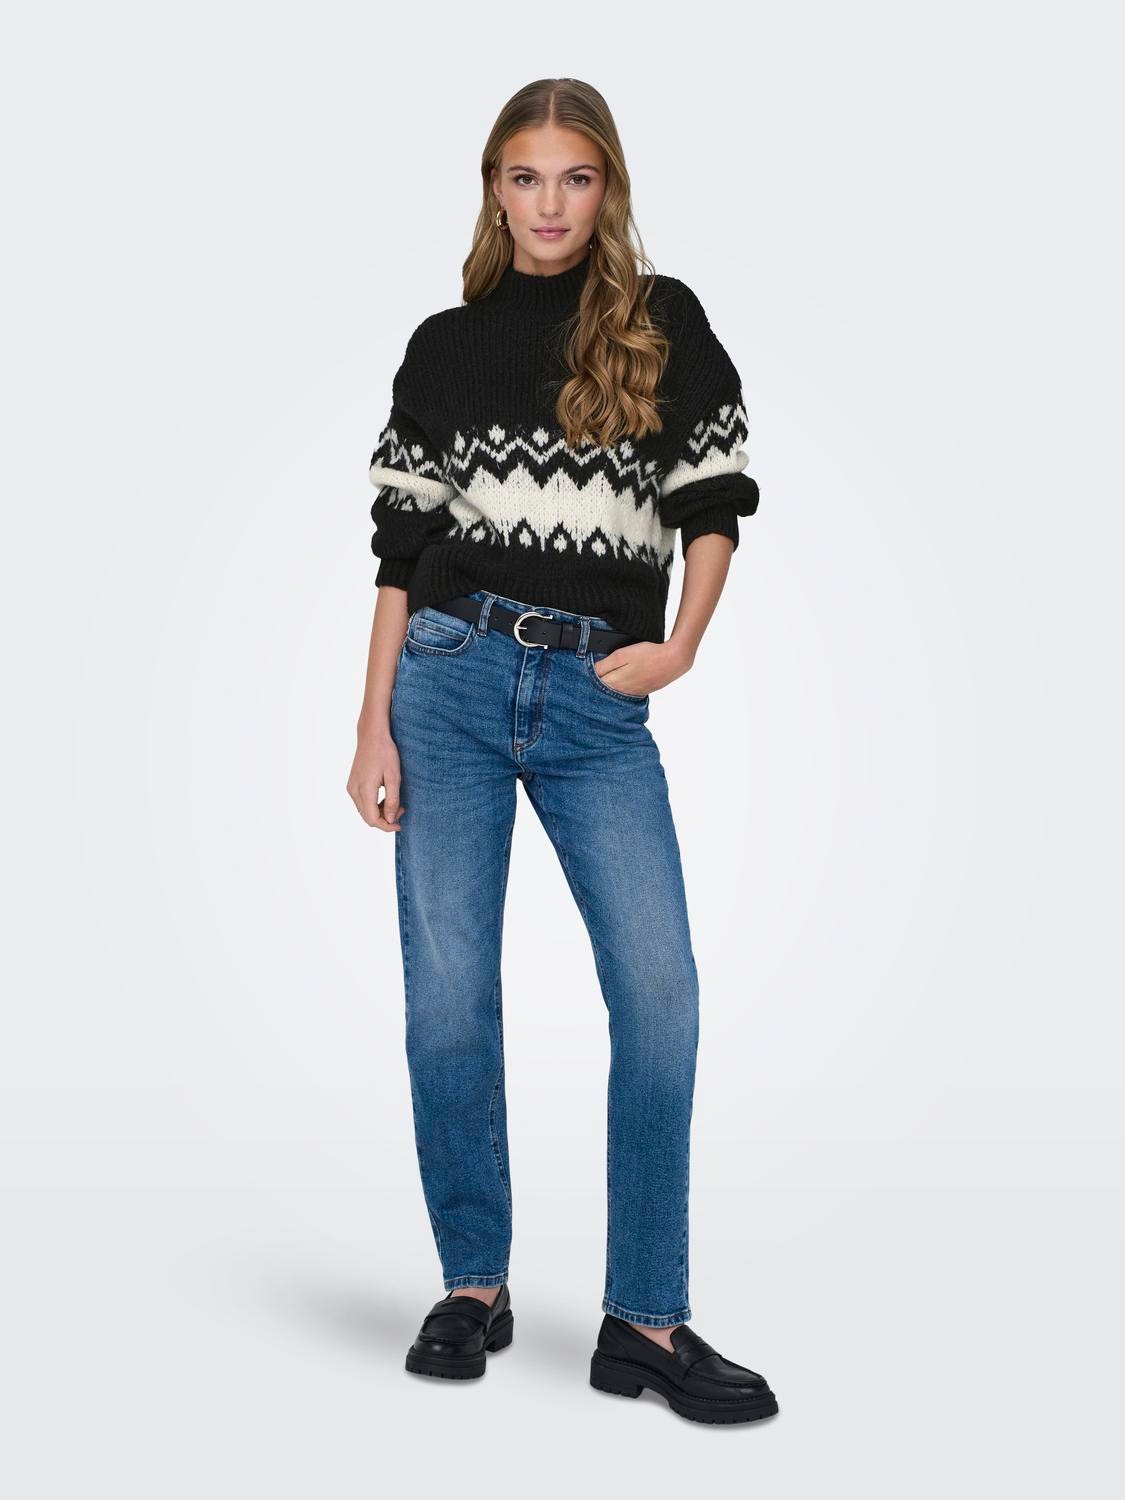 ONLY Knitted pullover with high neck -Black - 15328582